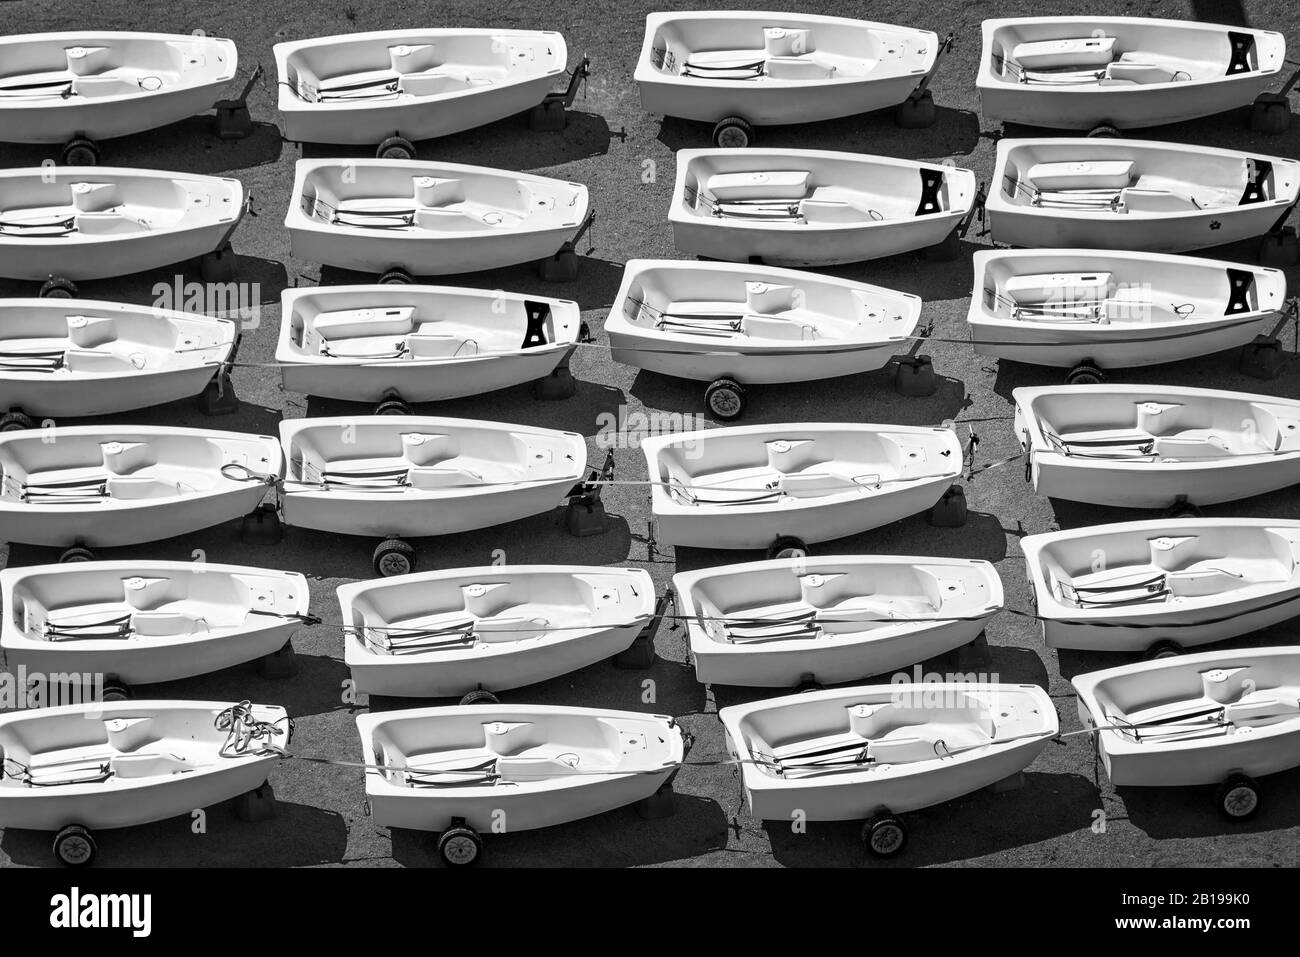 Aerial view of Optimist dinghies aligned. Sailing school boats in black and white Stock Photo